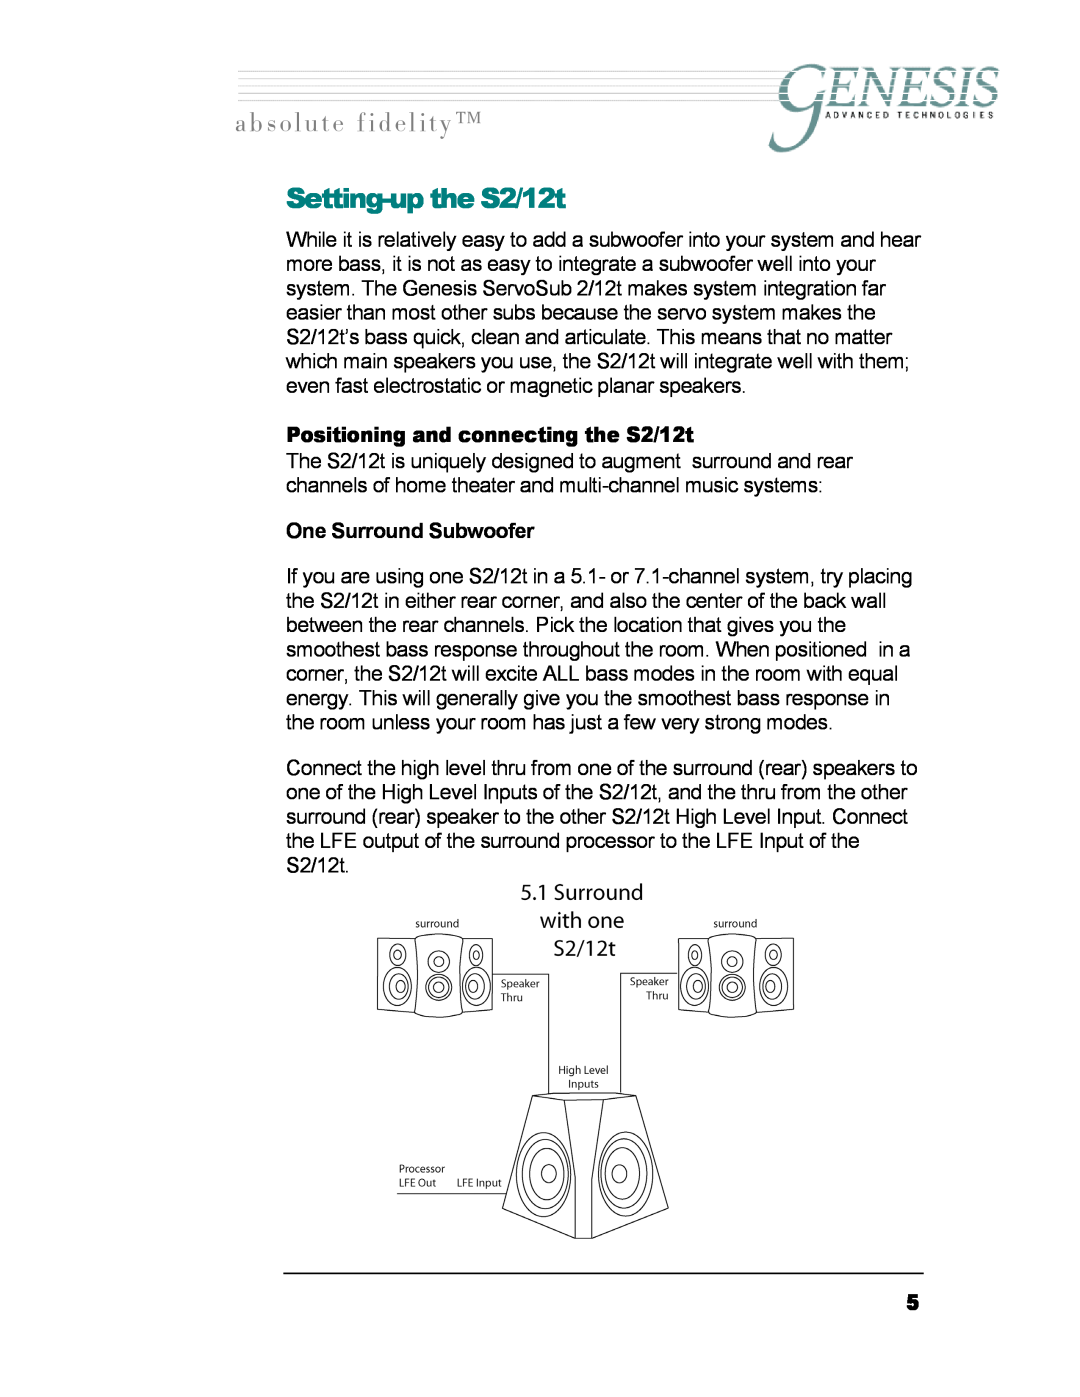 Genesis I.C.E owner manual Setting-upthe S2/12t, Positioning and connecting the S2/12t, One Surround Subwoofer 